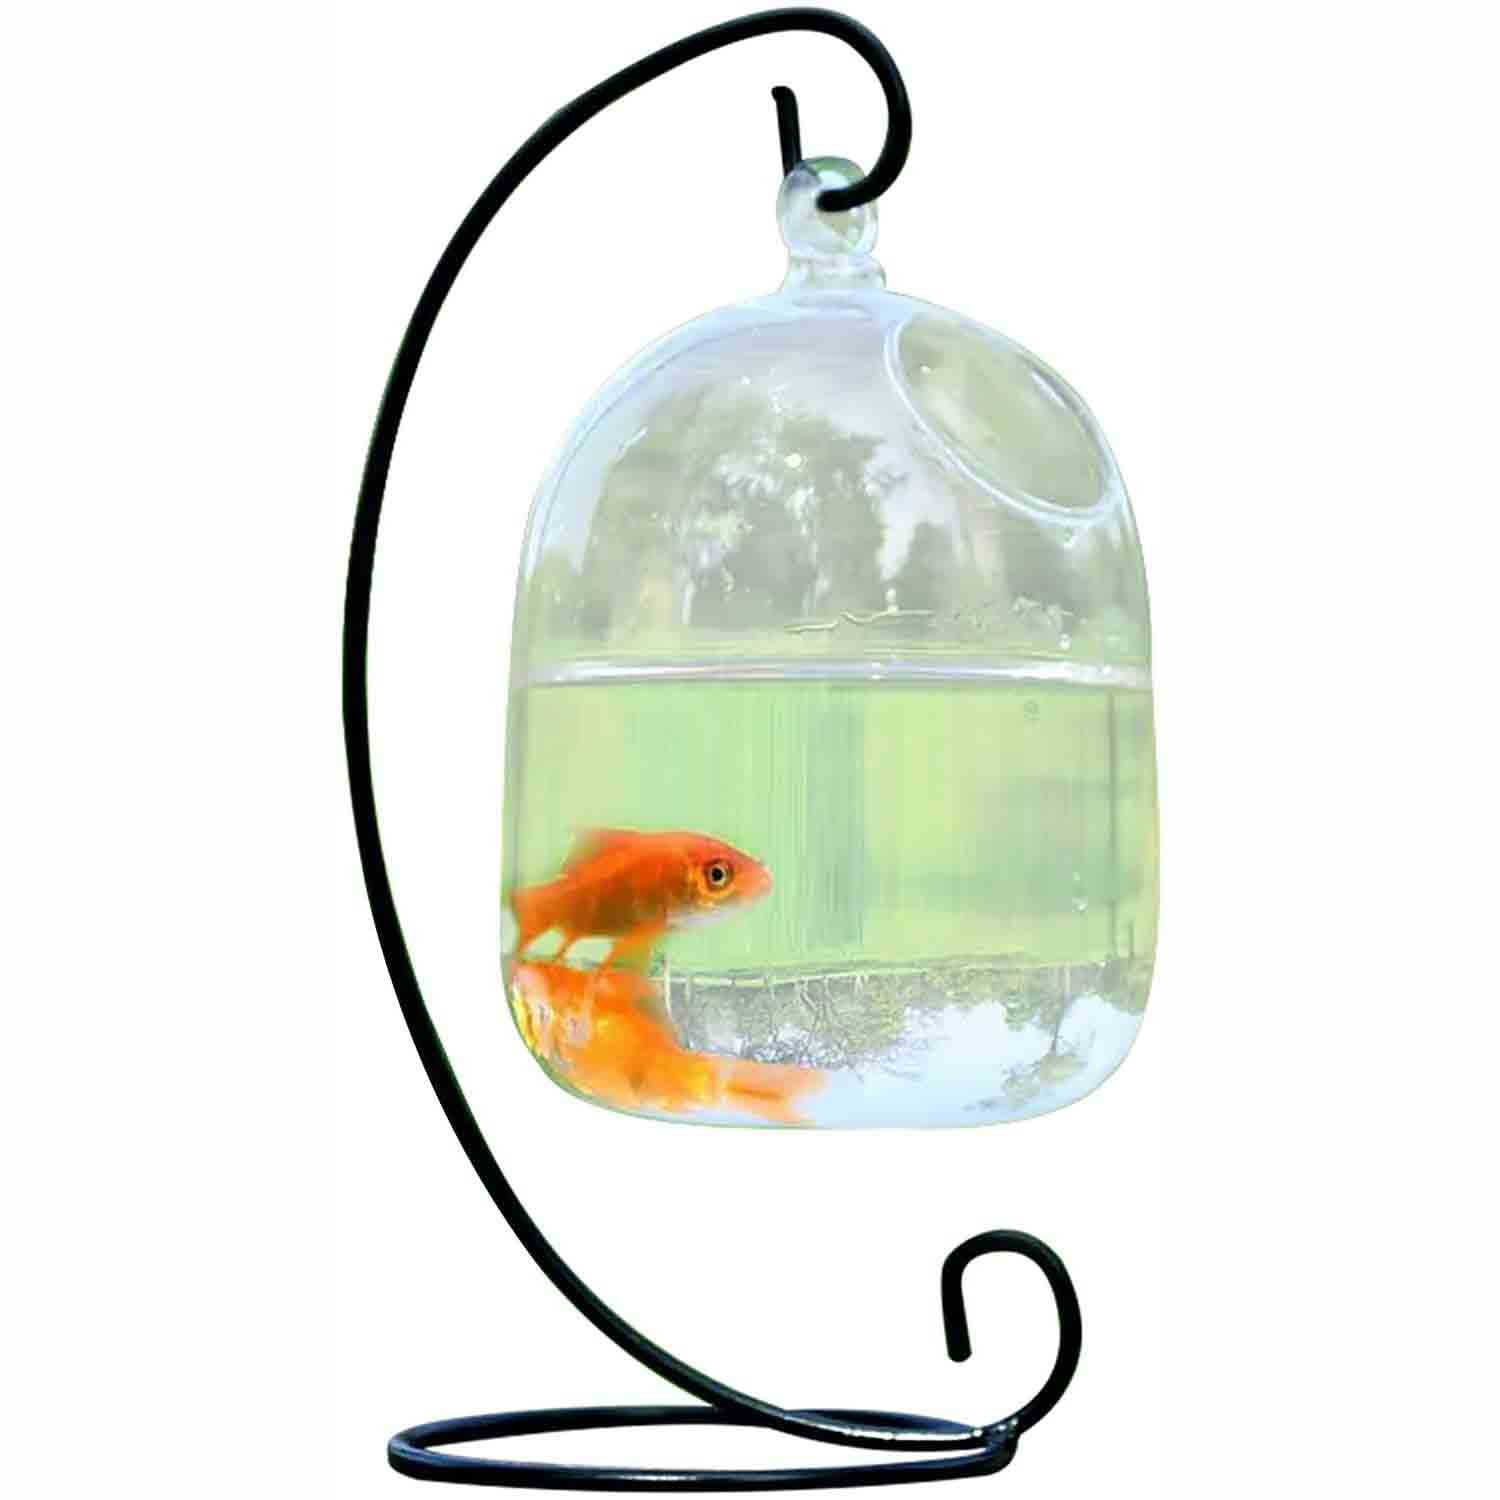 Balacoo Hanging Fish Tank Glass Fish Bowl Clear Plant Terrarium with Stand for Home Office Garden Wedding Table Decor Random Color Empty Fish Tank